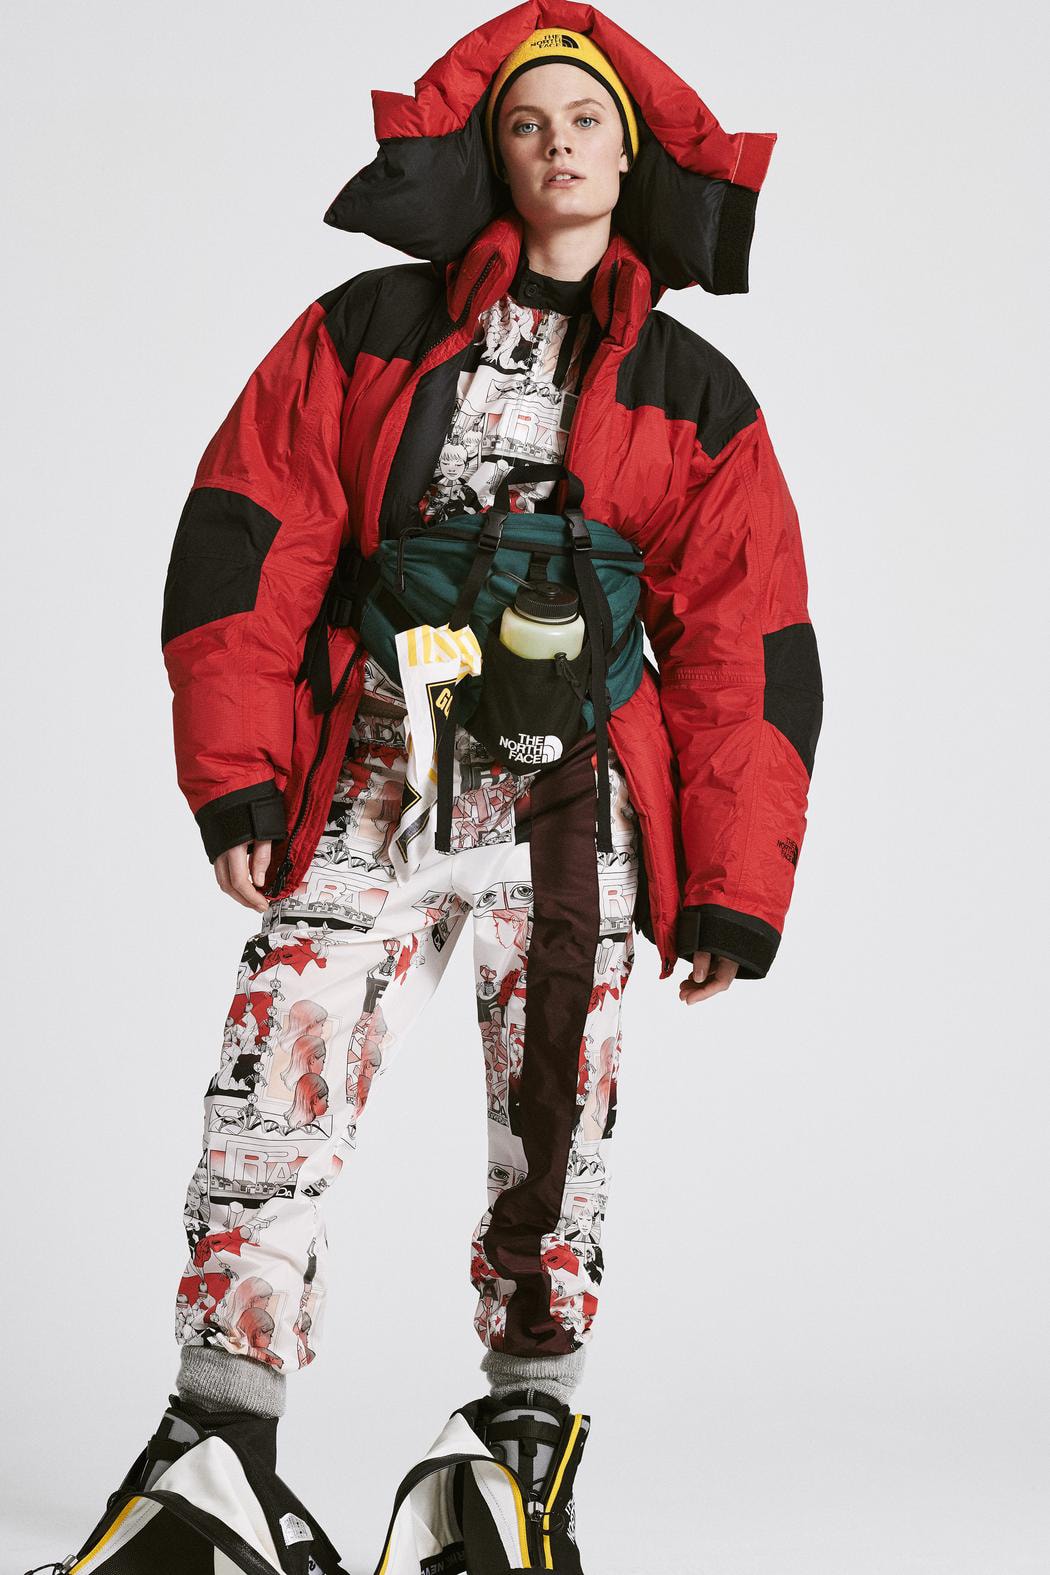 Vintage The North Face Vice Garage Magazine Archive 50 fifty years rare baltoro editorial Steep Tech tonar tech gear mountain light guide gore tex all weather